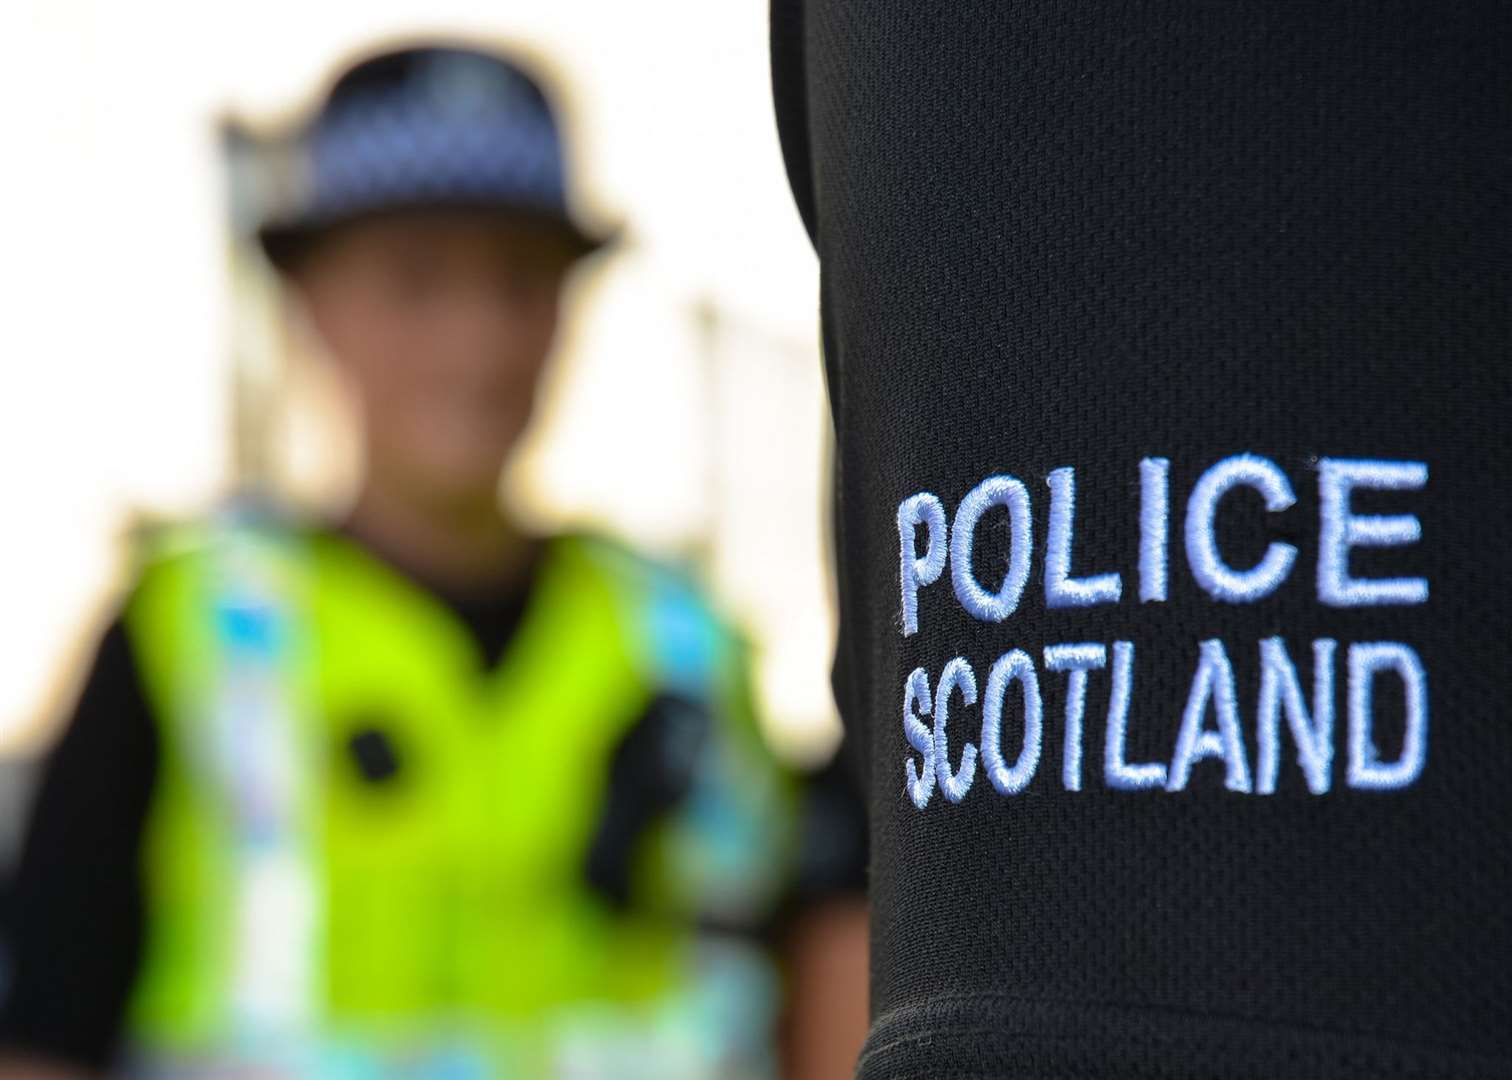 Police appealed for information after the car hit a pet dog in Inverness.